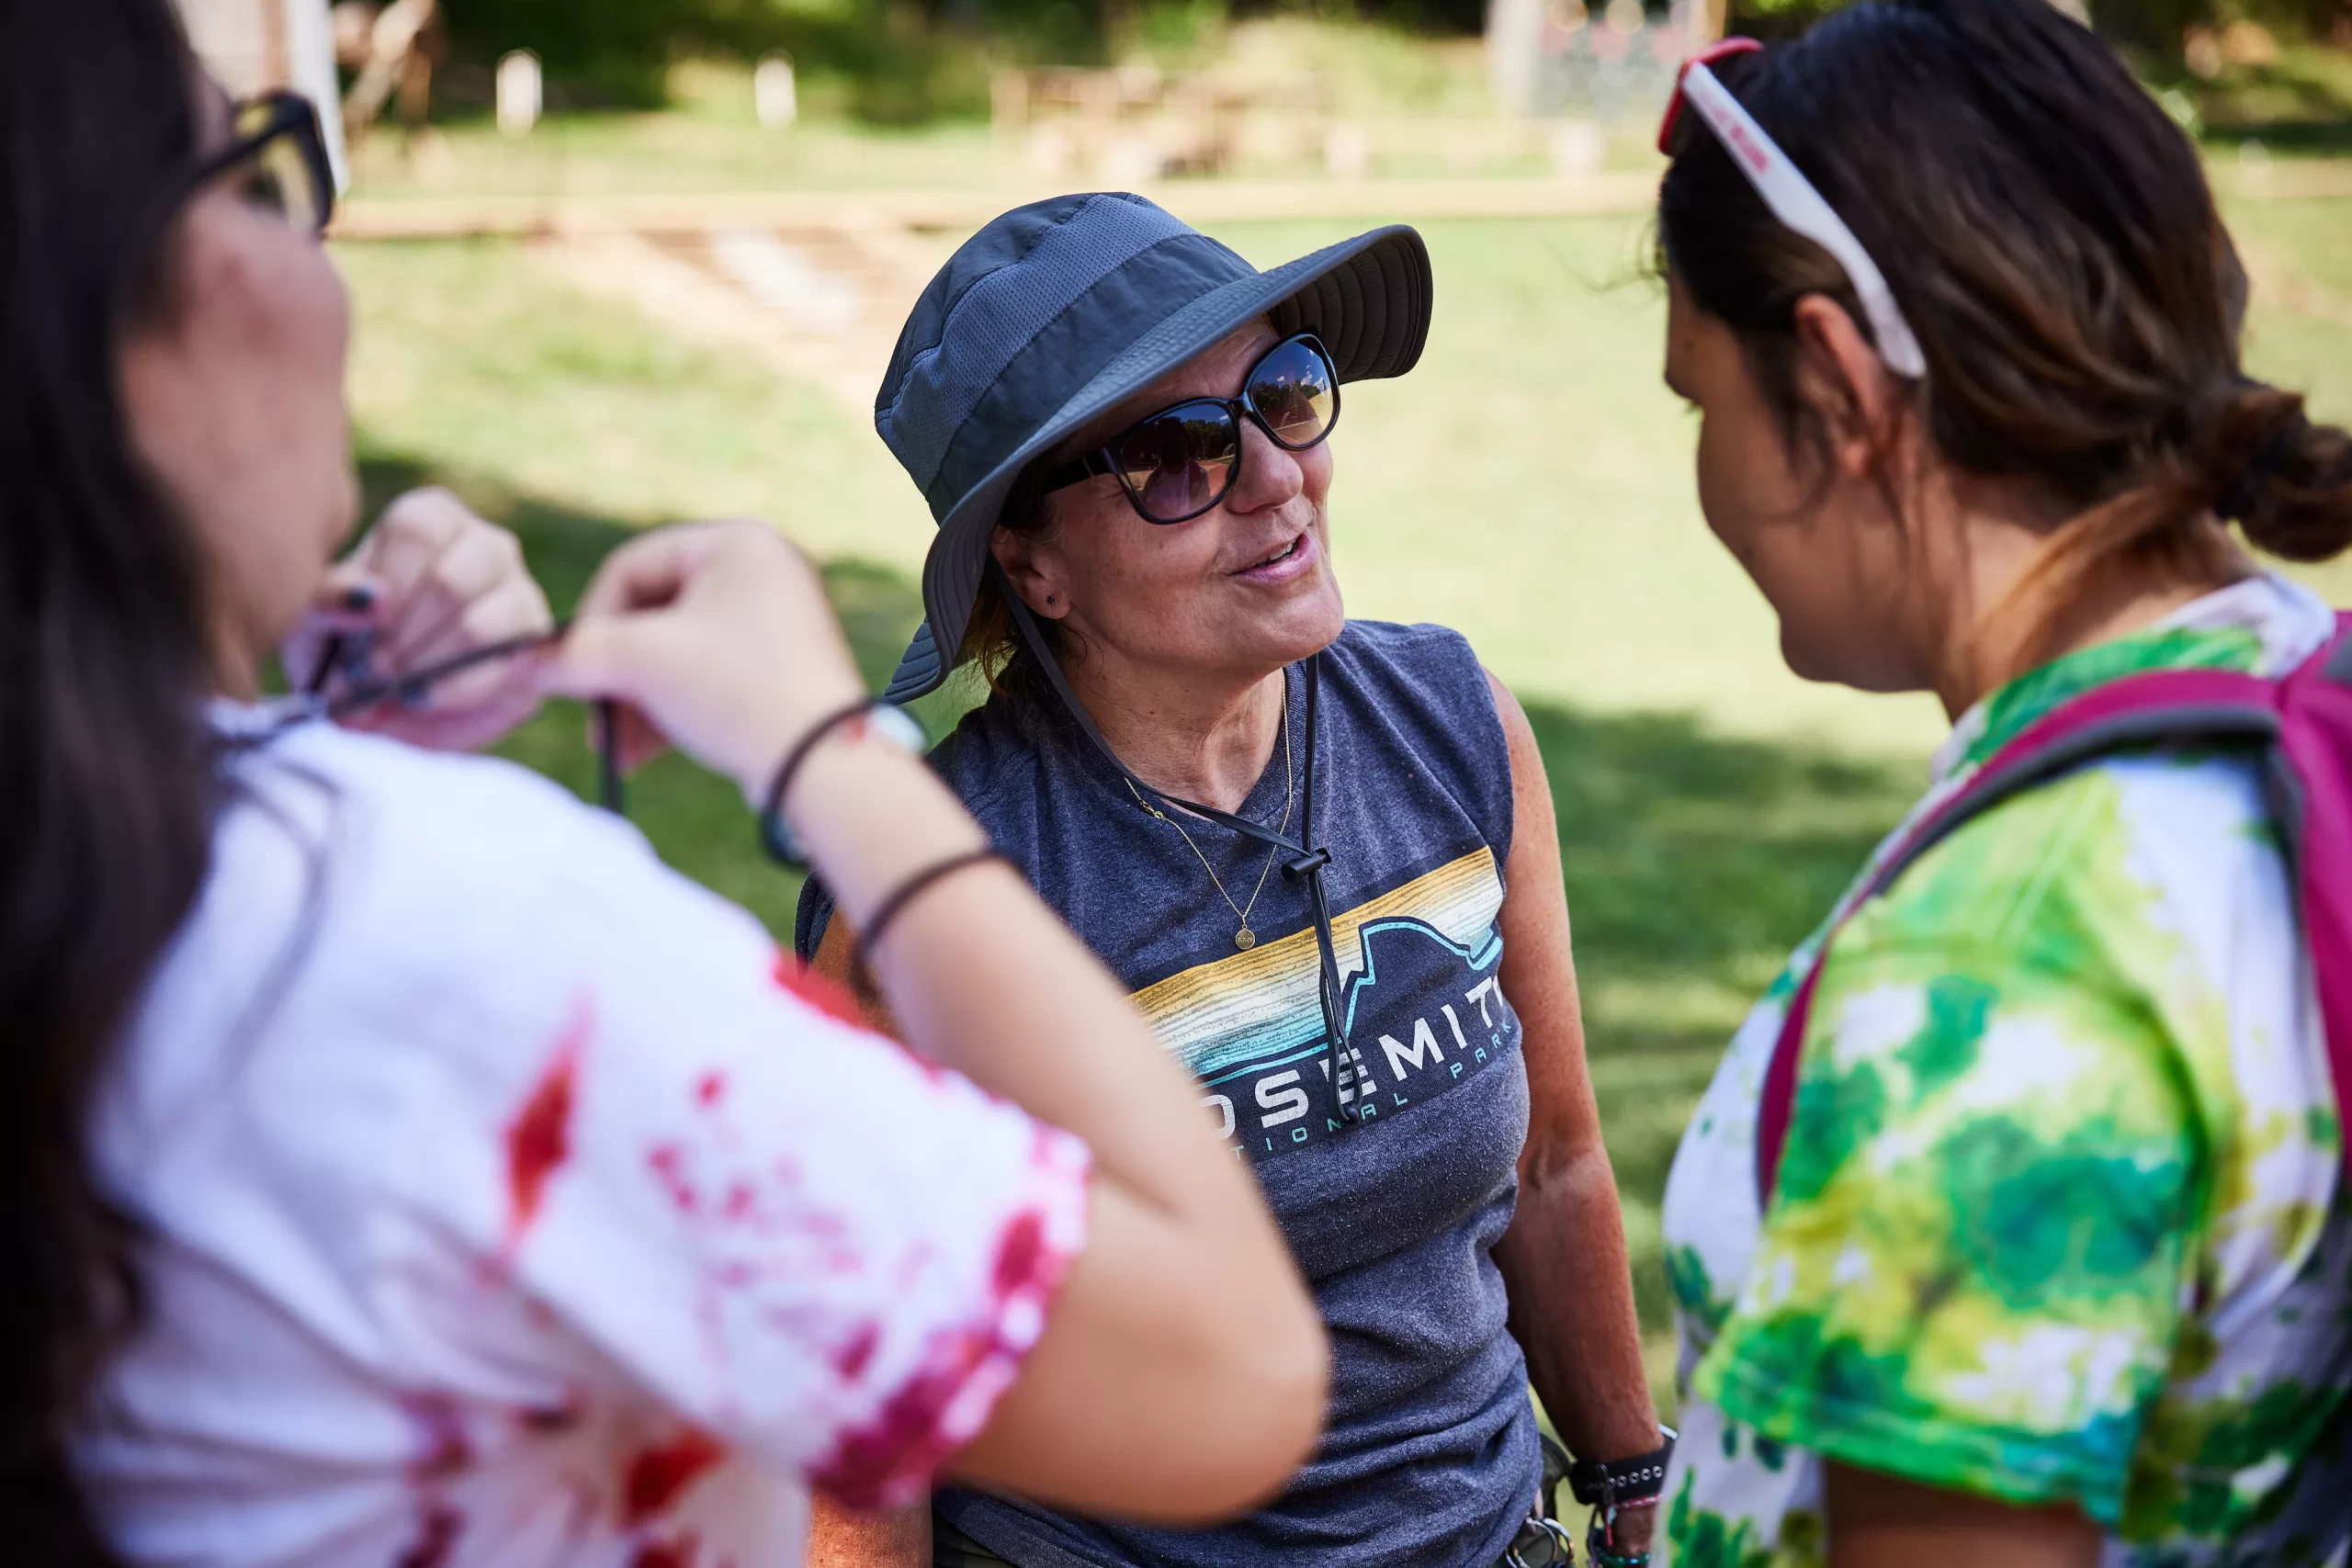 An outside scene where a female camp counselor wearing a hat chats with two campers wearing tie-dye shirts.